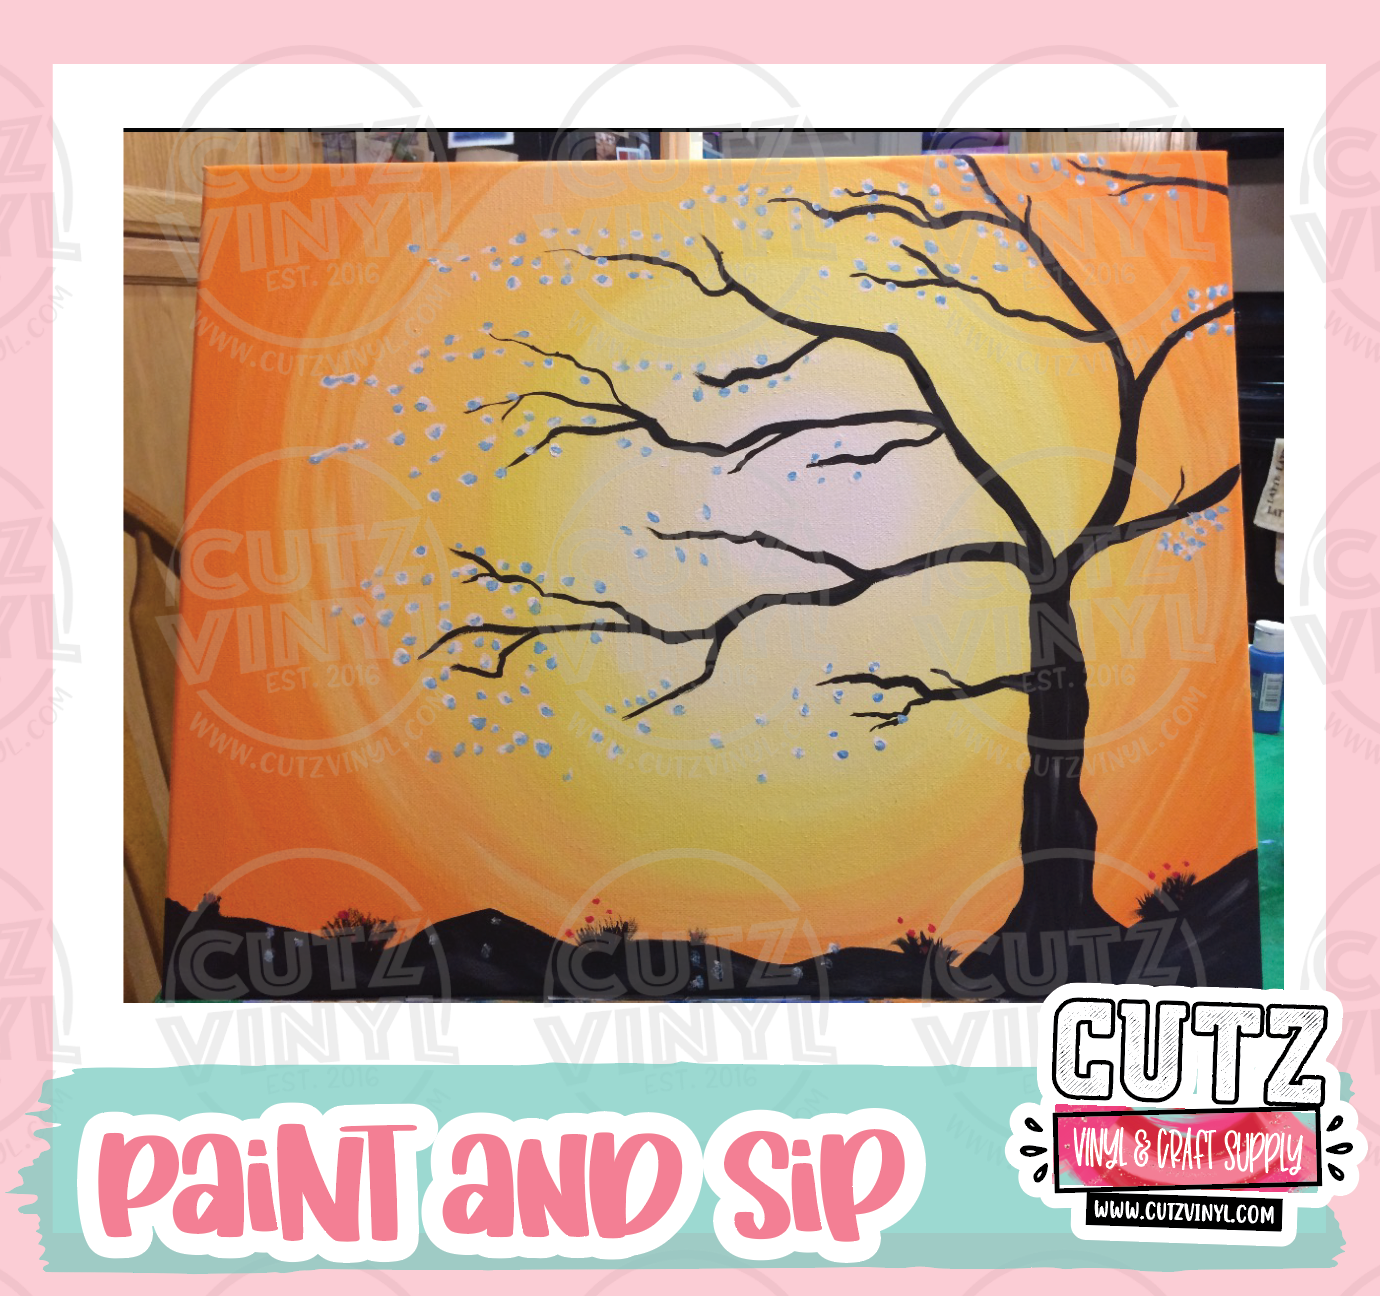 Paint and Sip - October 15th 1-3pm